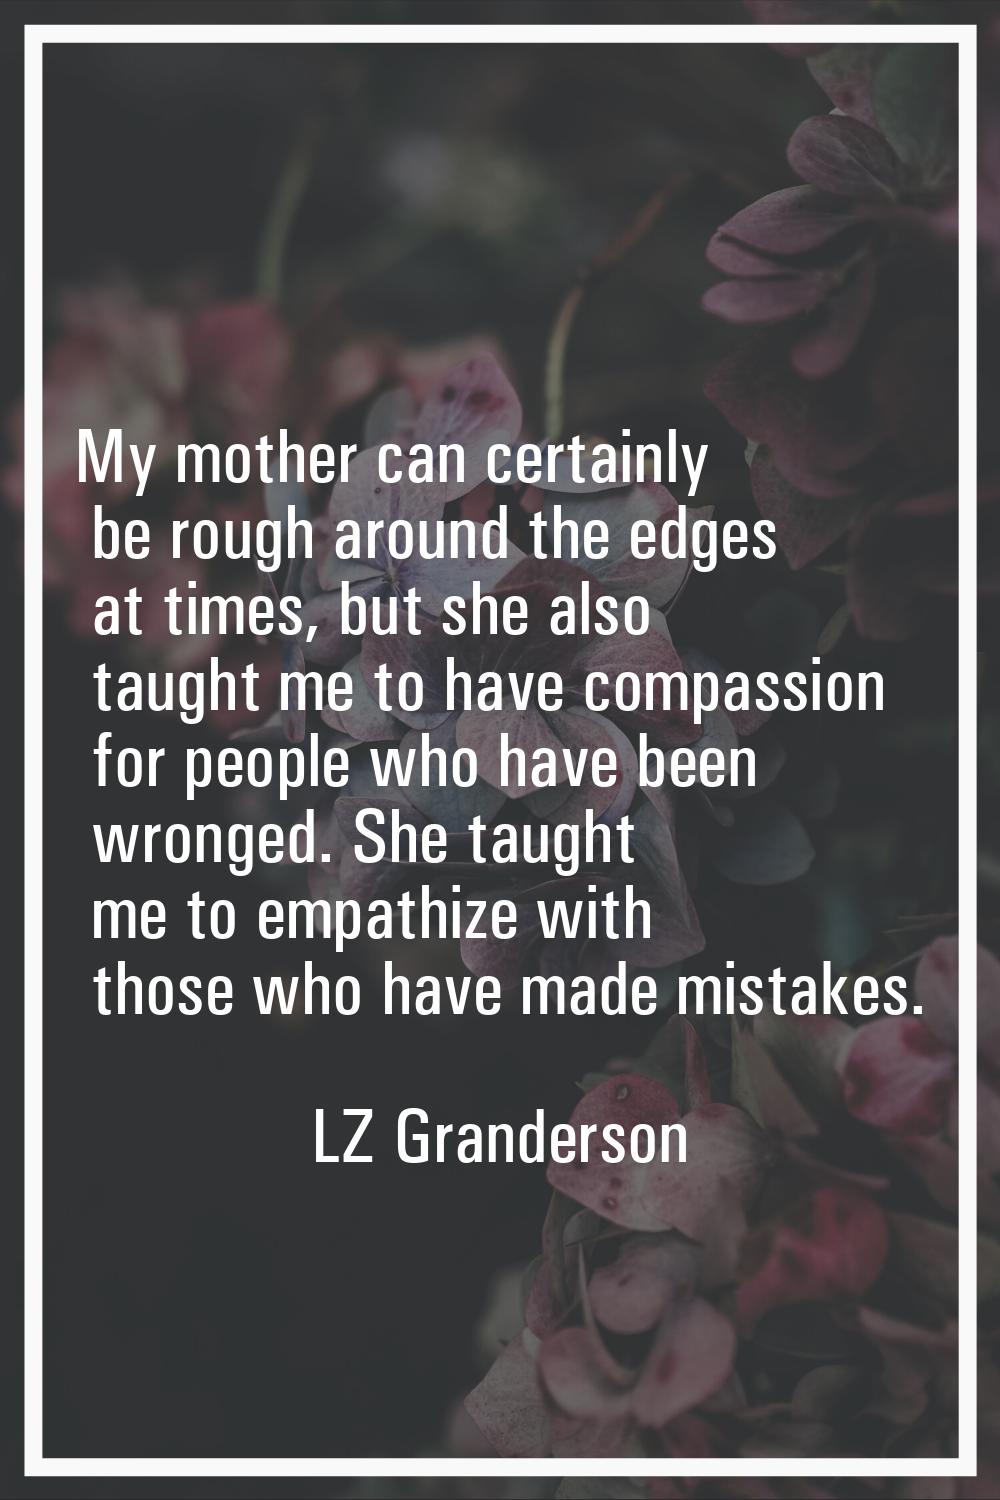 My mother can certainly be rough around the edges at times, but she also taught me to have compassi